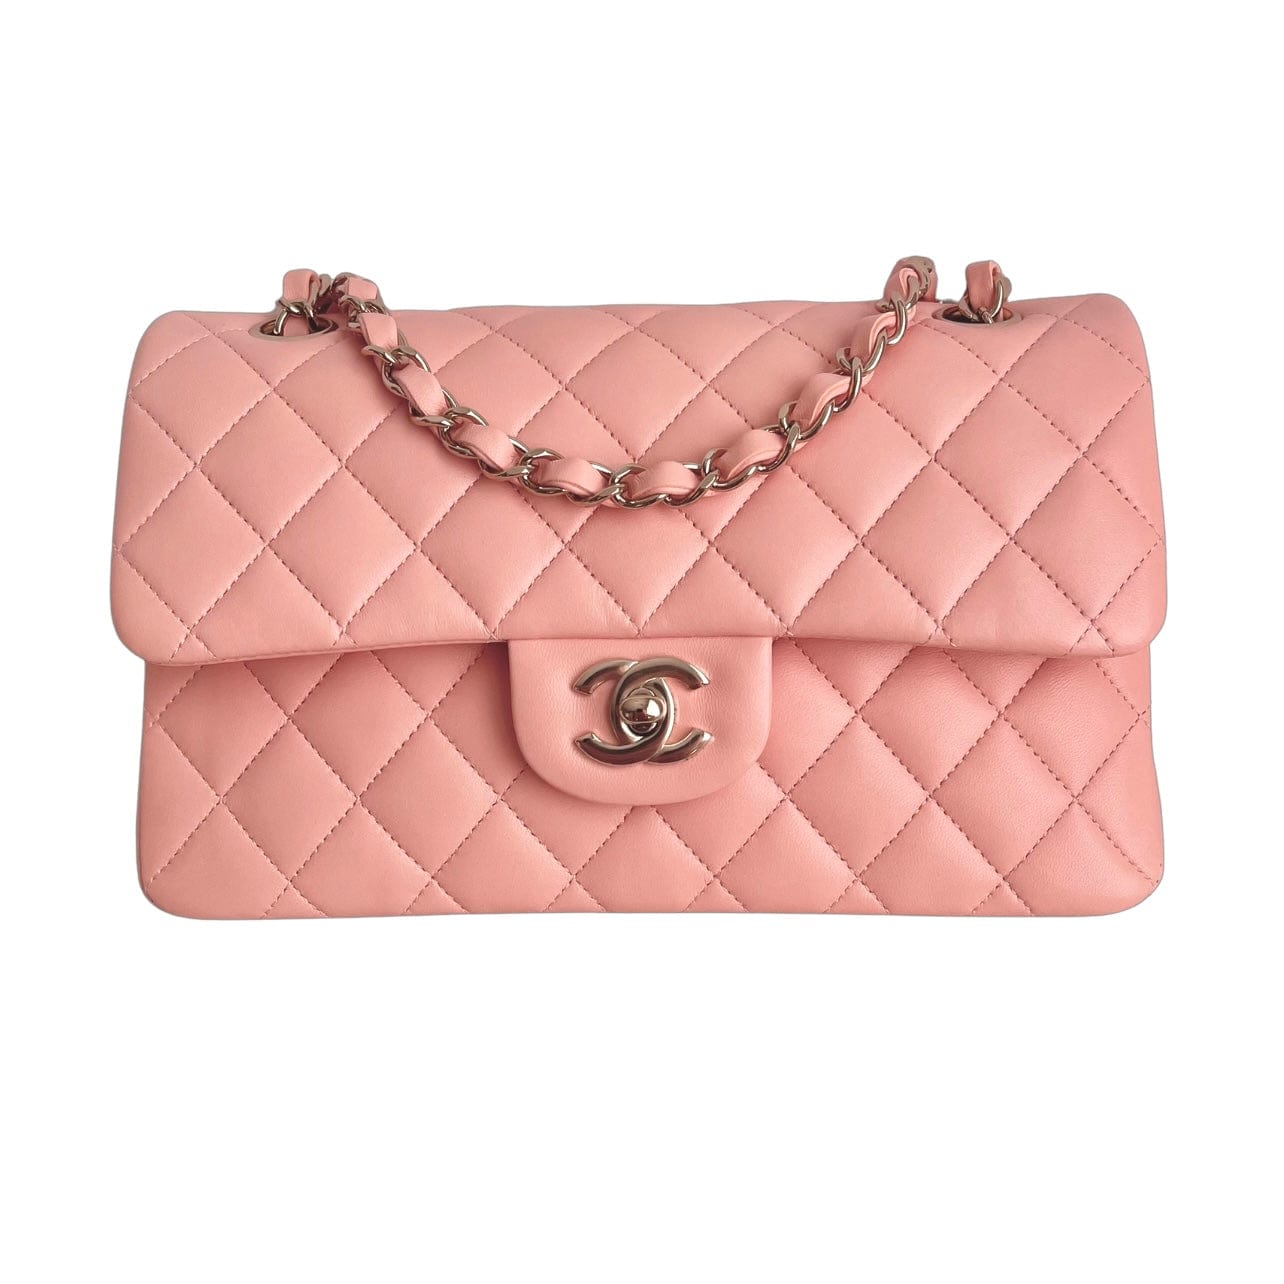 2019 Chanel Pink Quilted Lambskin Leather Mini Flap Bag at 1stDibs  chanel  small flap bag 2019, pink chanel bag mini, 2019 chanel bags